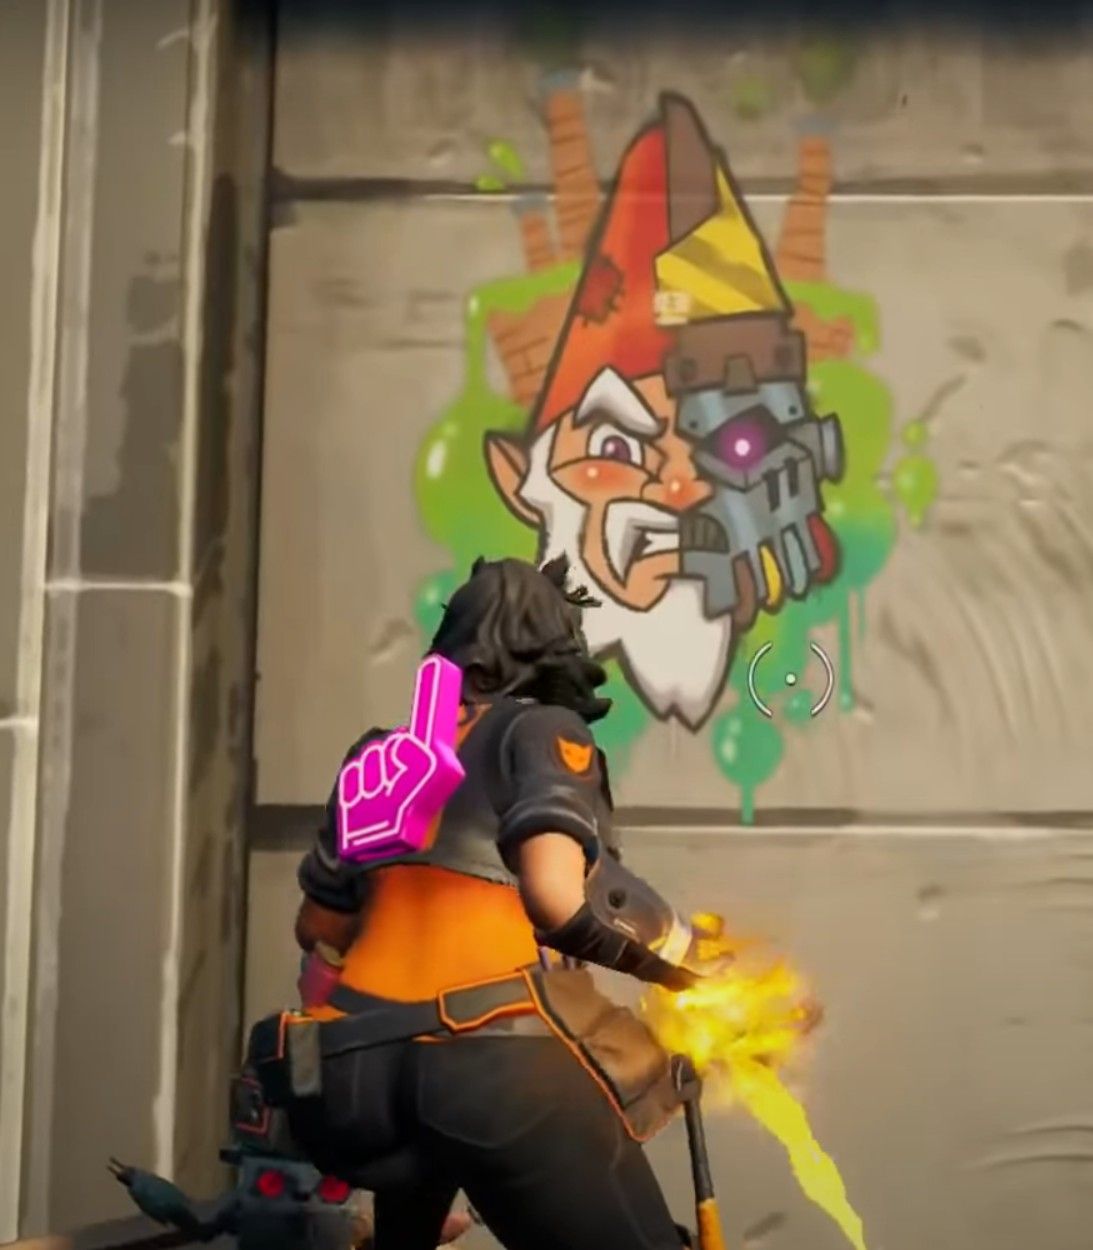 A player finds one of the Most Wanted sprays in Fortnite Season 4